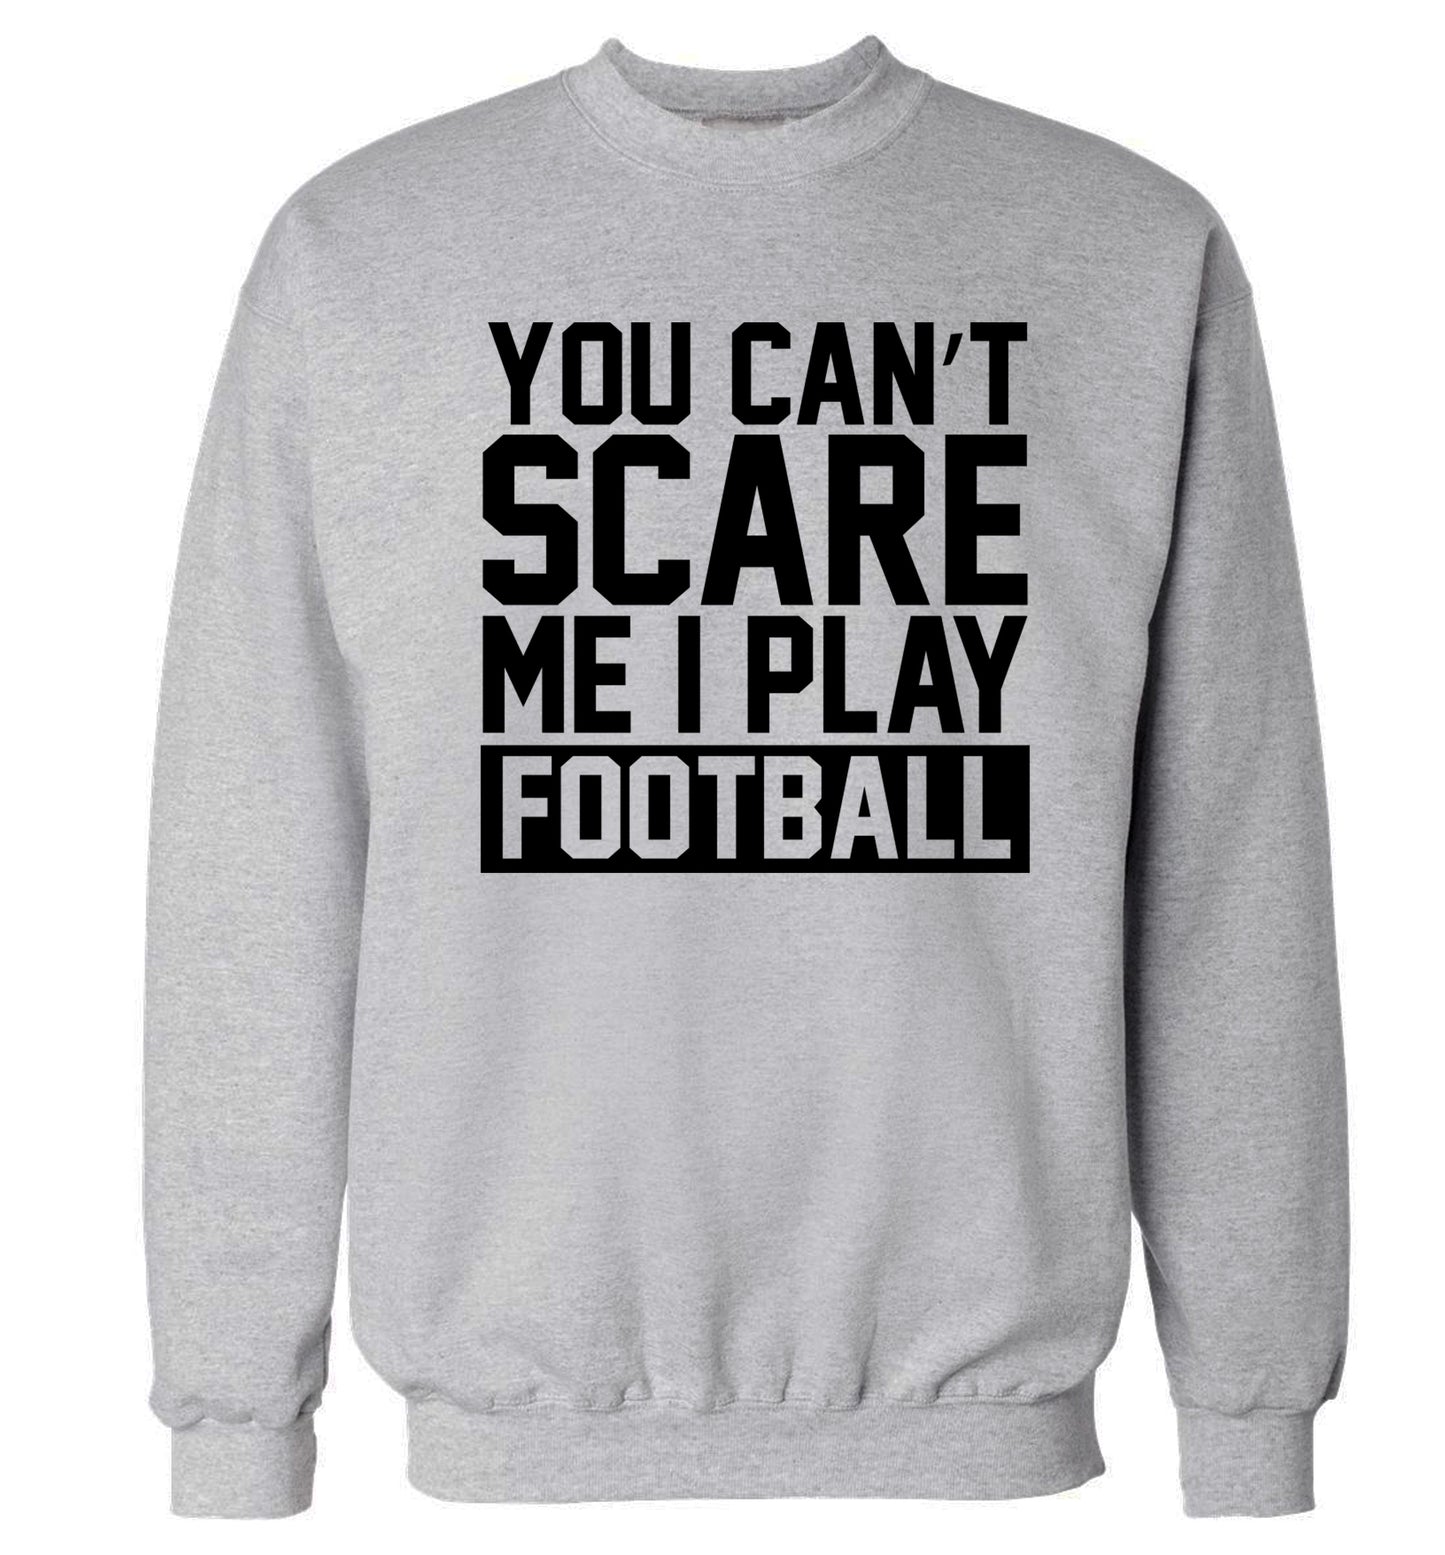 You can't scare me I play football Adult's unisex grey Sweater 2XL